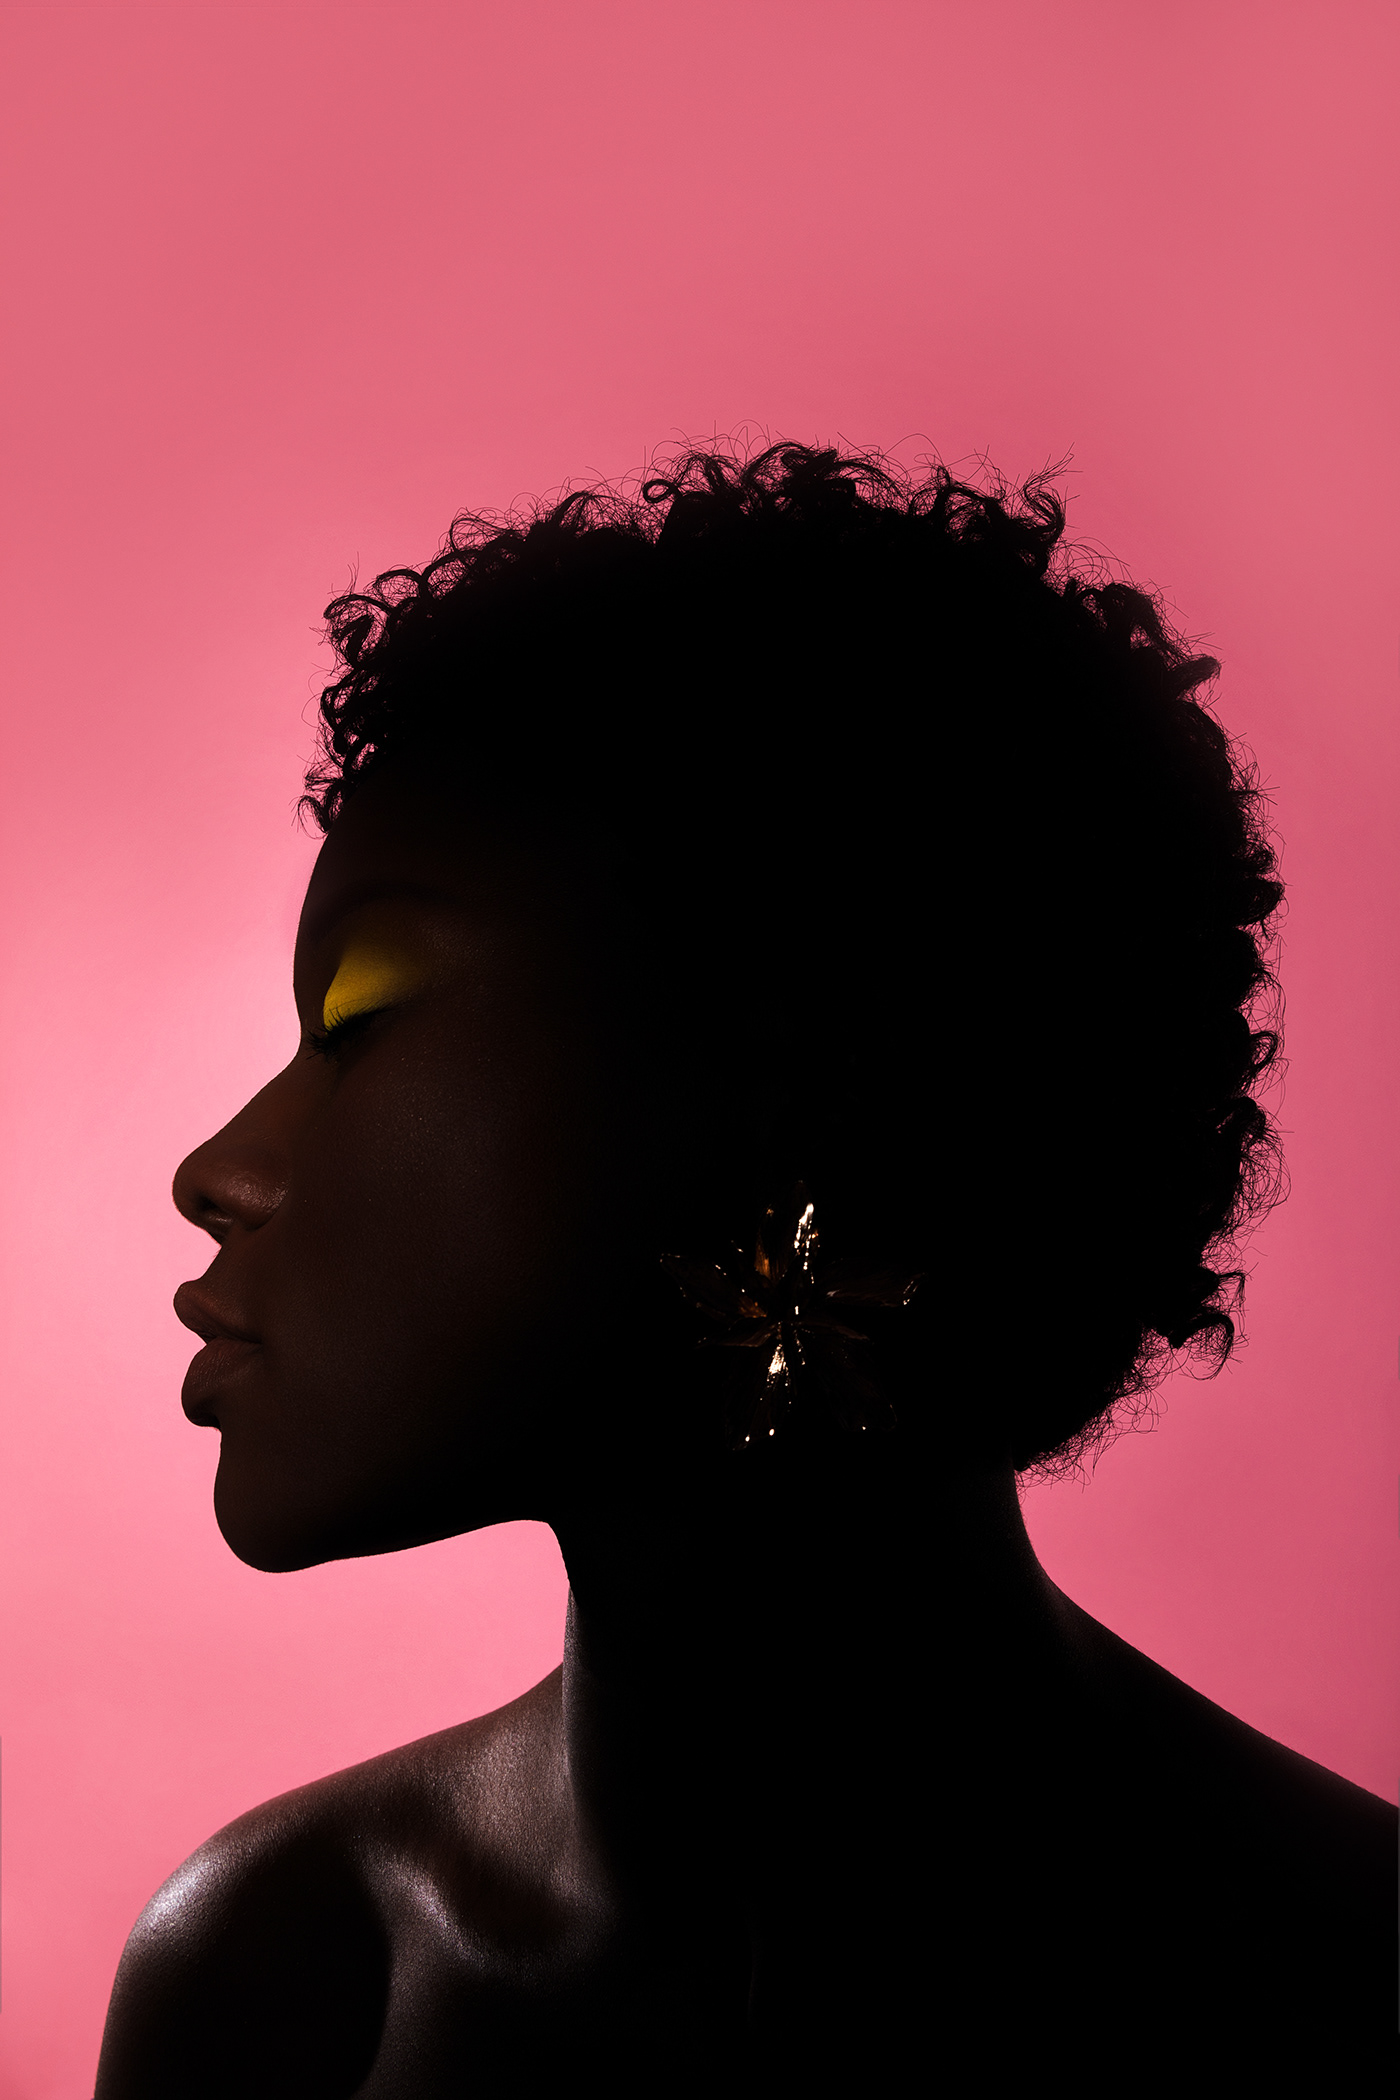 afro beauty contrast shadow Silhouette